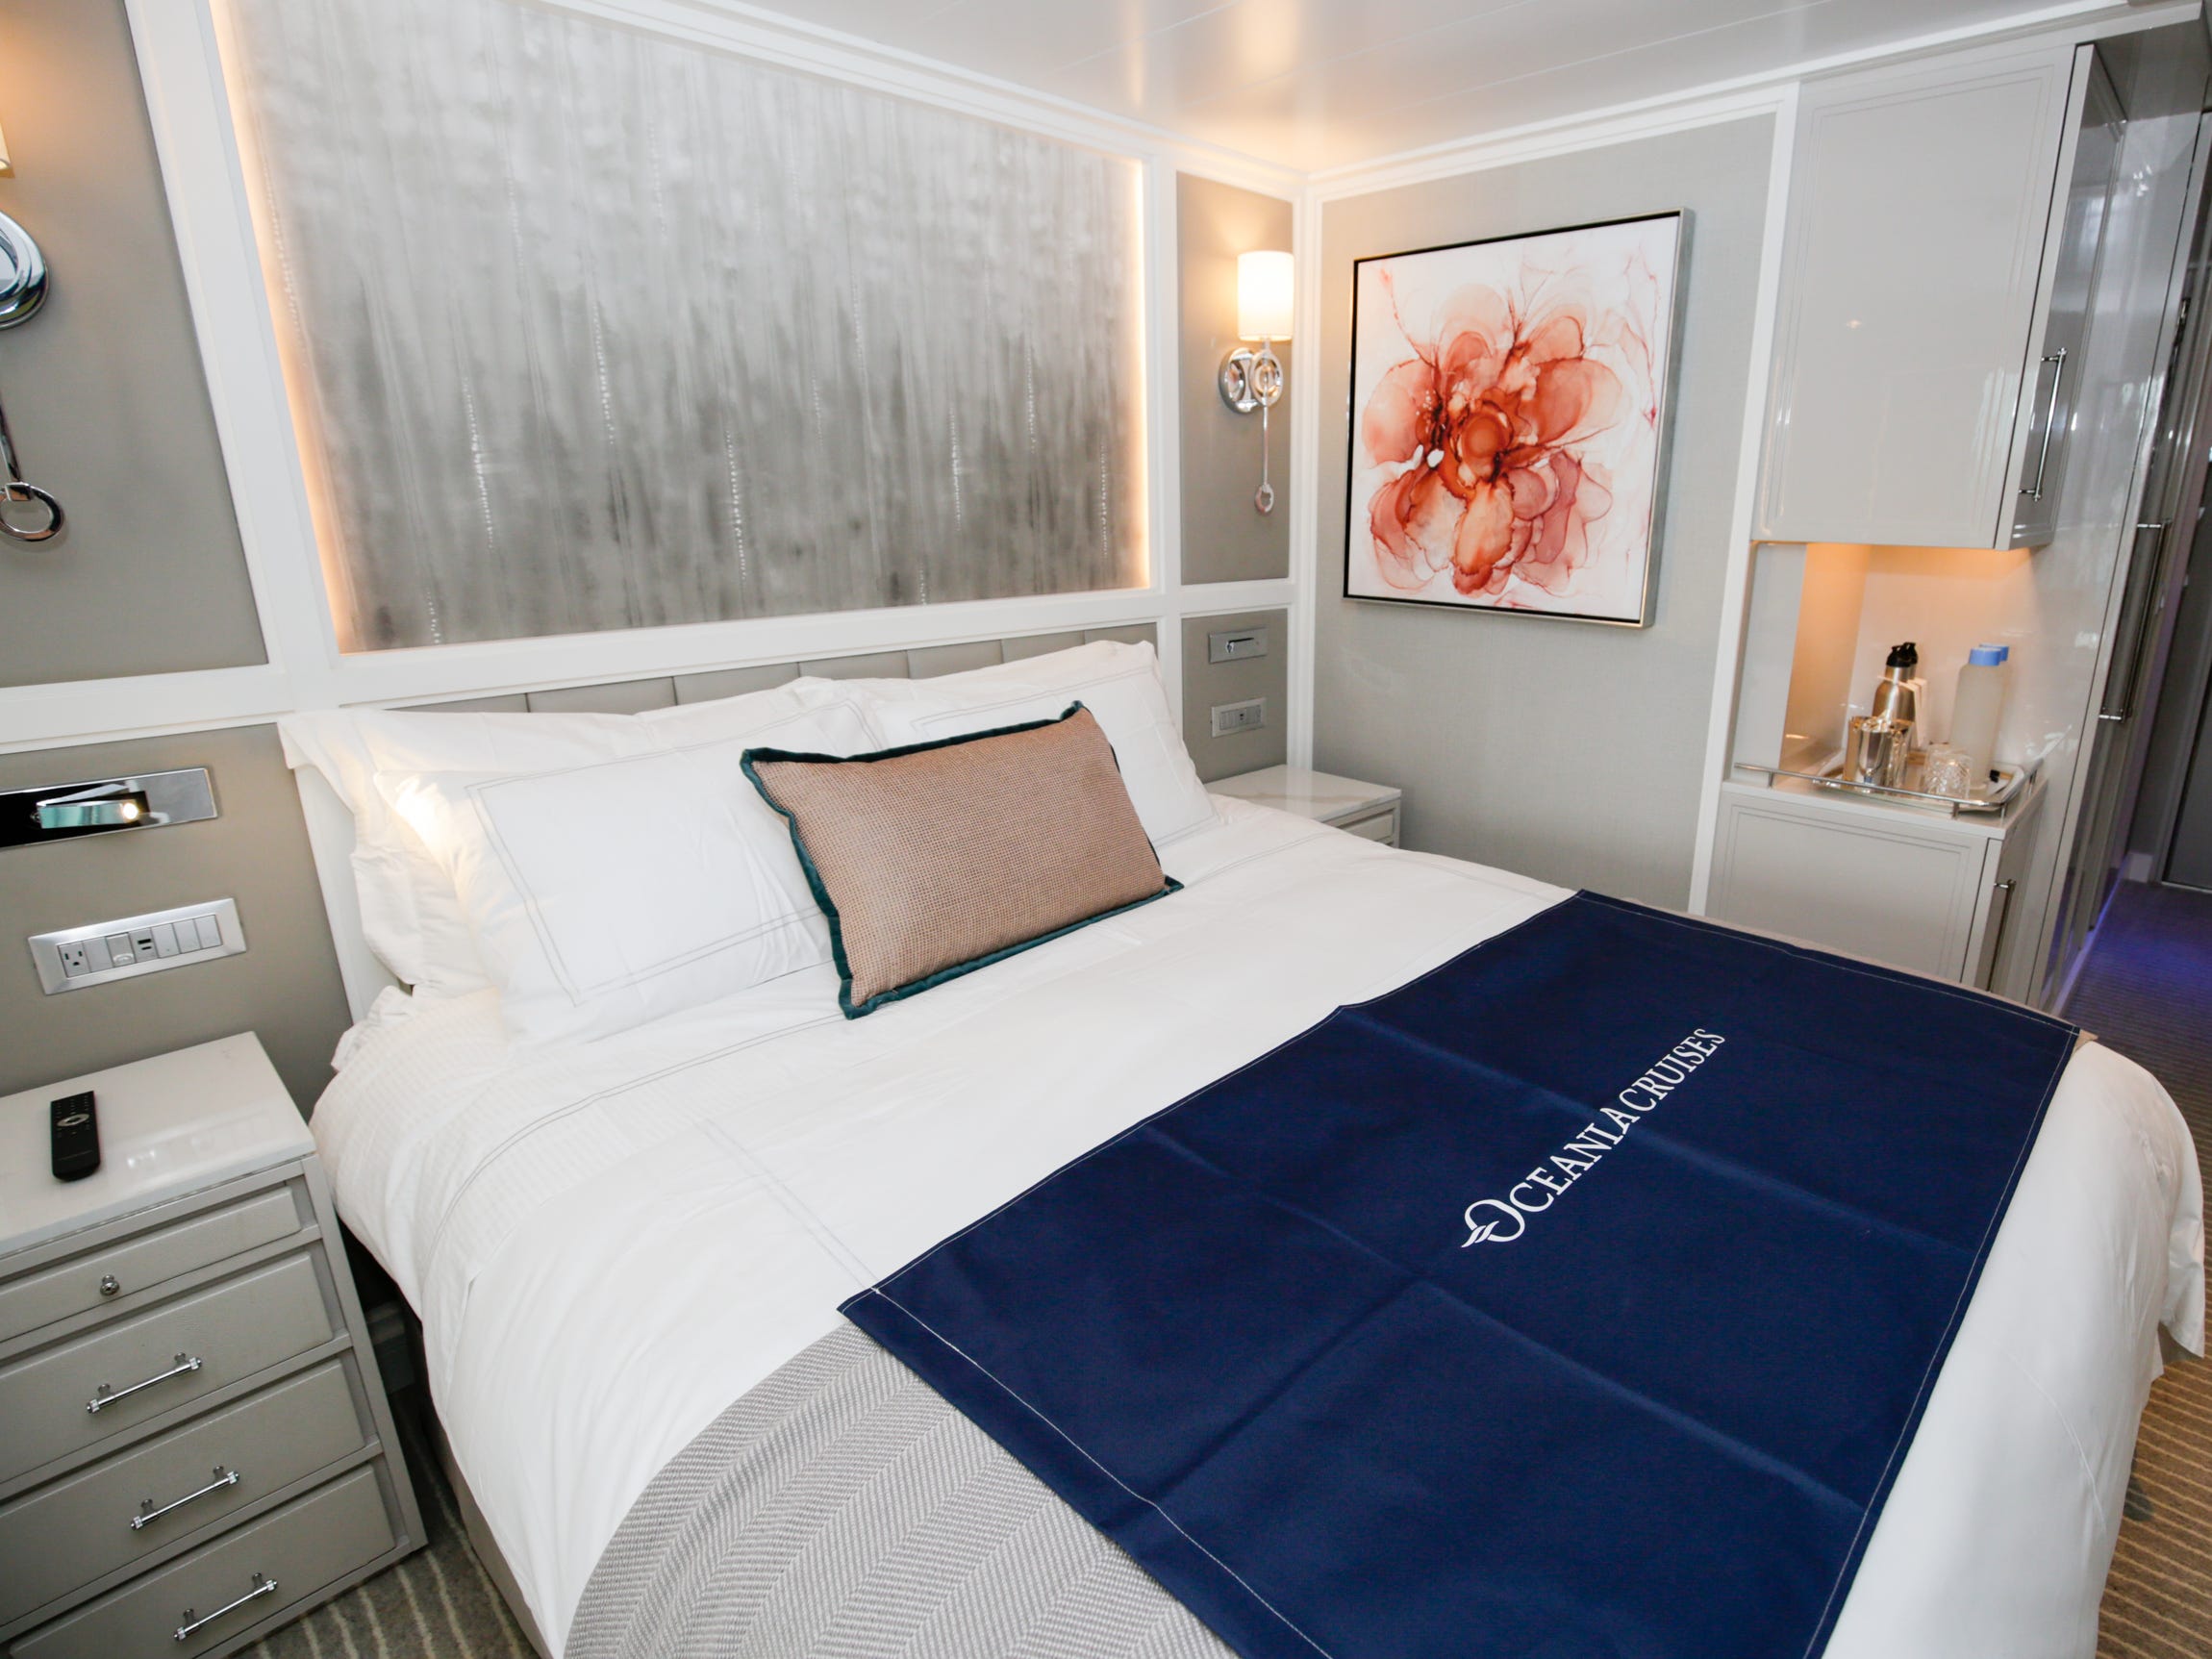 <p>This slumber space had 1,000-thread-count linens and Oceania's "Tranquility Bed."</p><p>It's so renowned, the cruise line even sells its own mattress and bedding. And after a nights rest on this bed set, I understand why.</p>